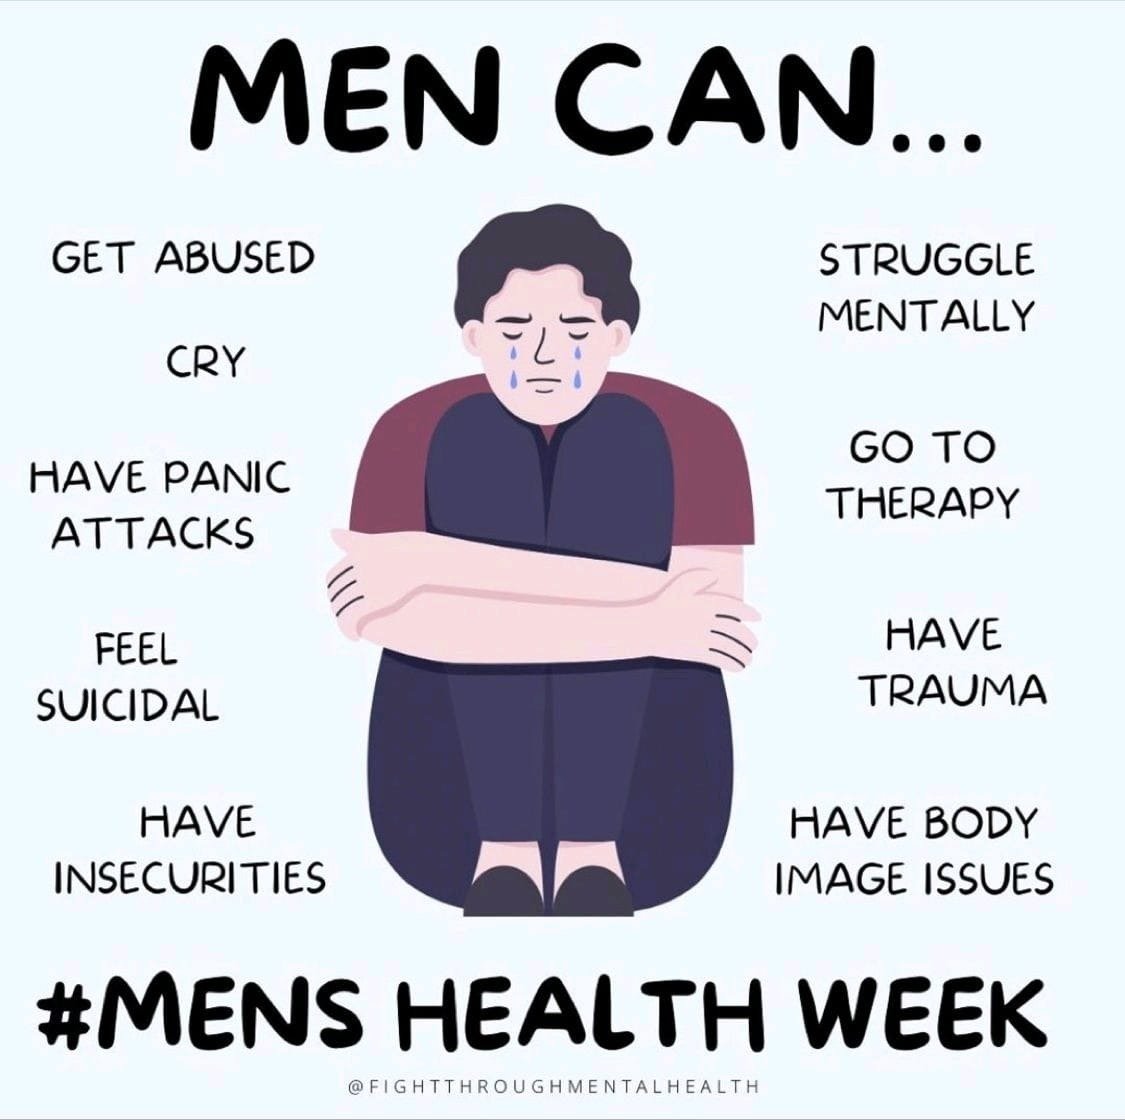 Both men and women can be affected by mental health. Poster via an original tweet by Iain Buchan